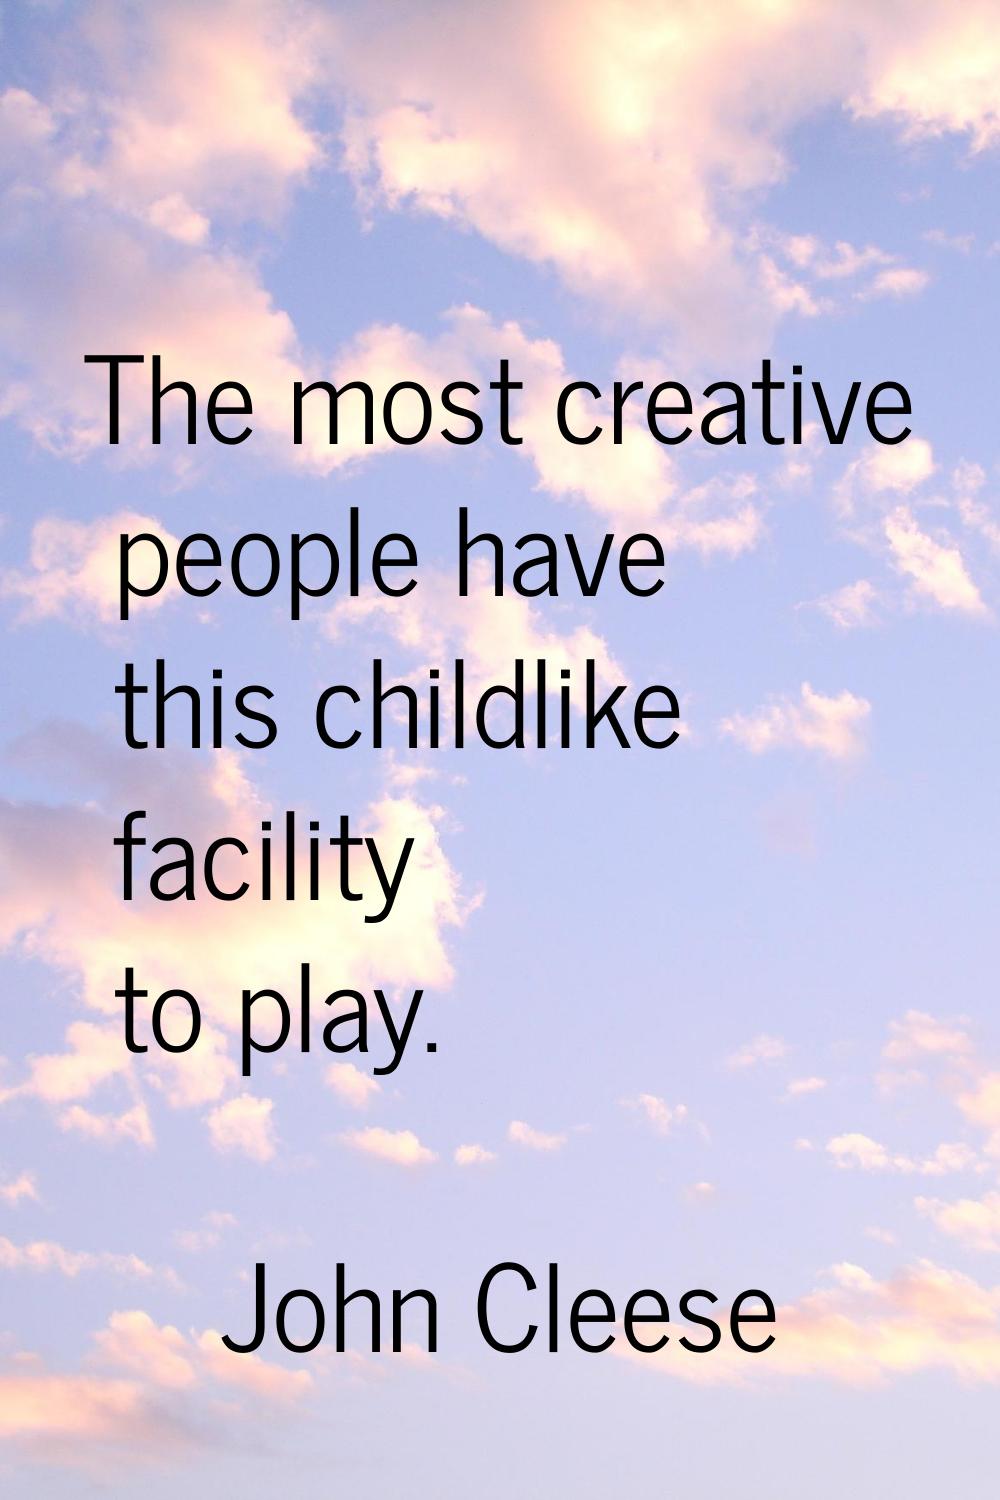 The most creative people have this childlike facility to play.